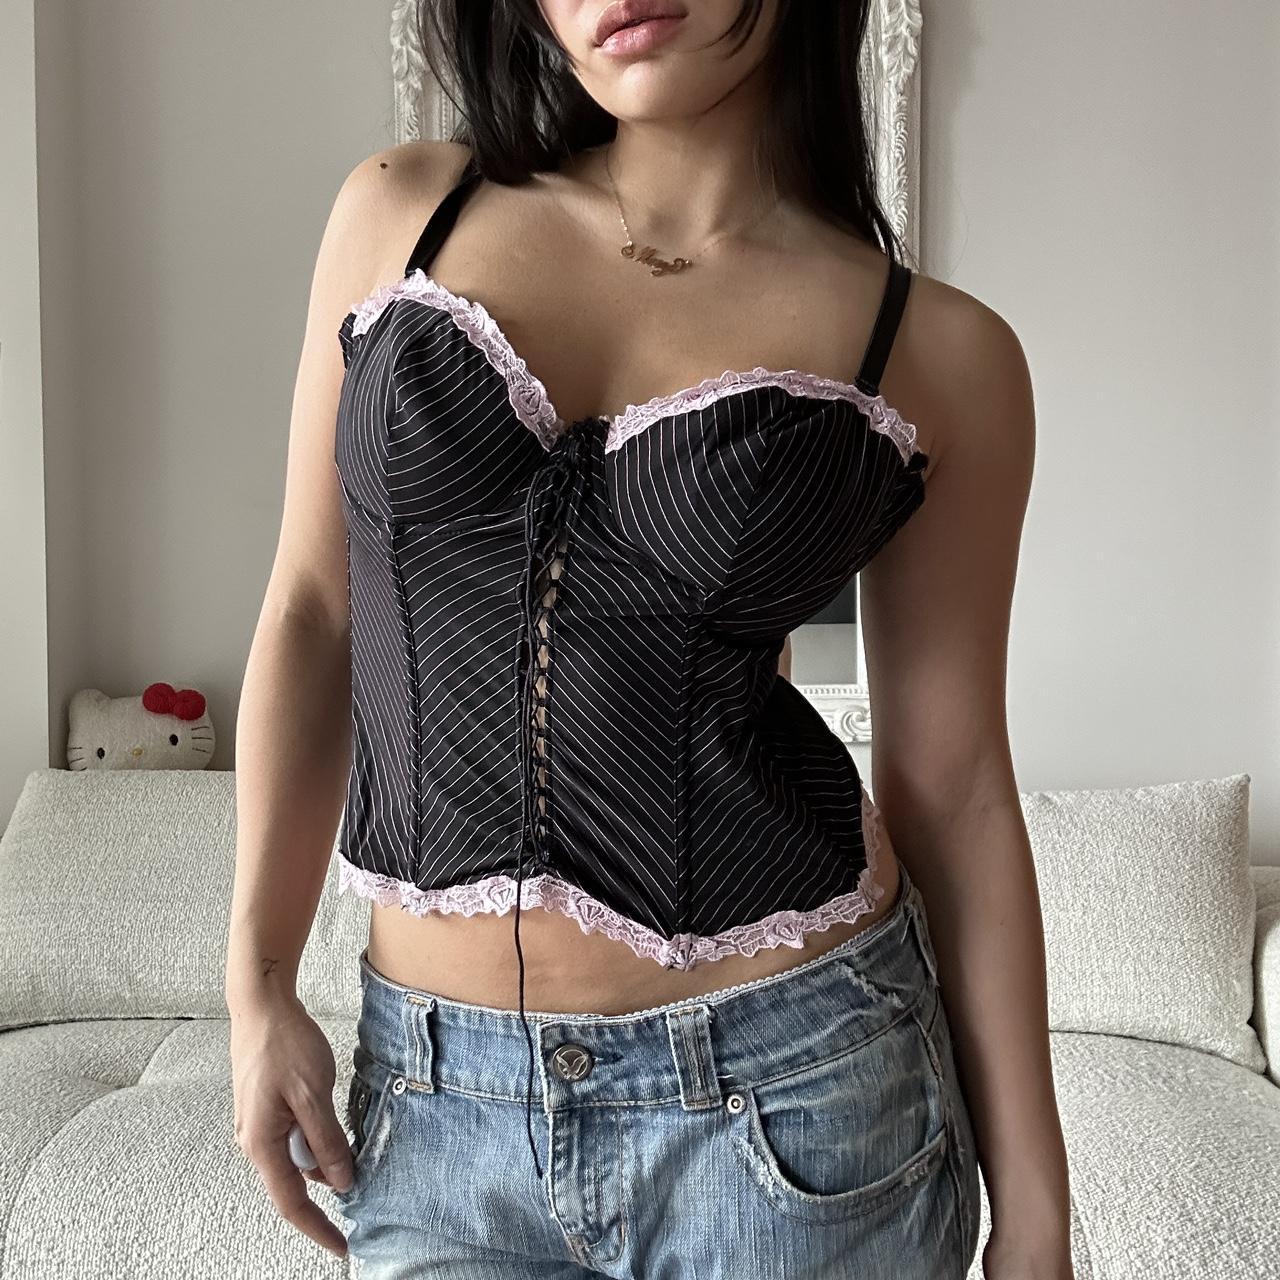 American Vintage Women's Black and Pink Corset (5)